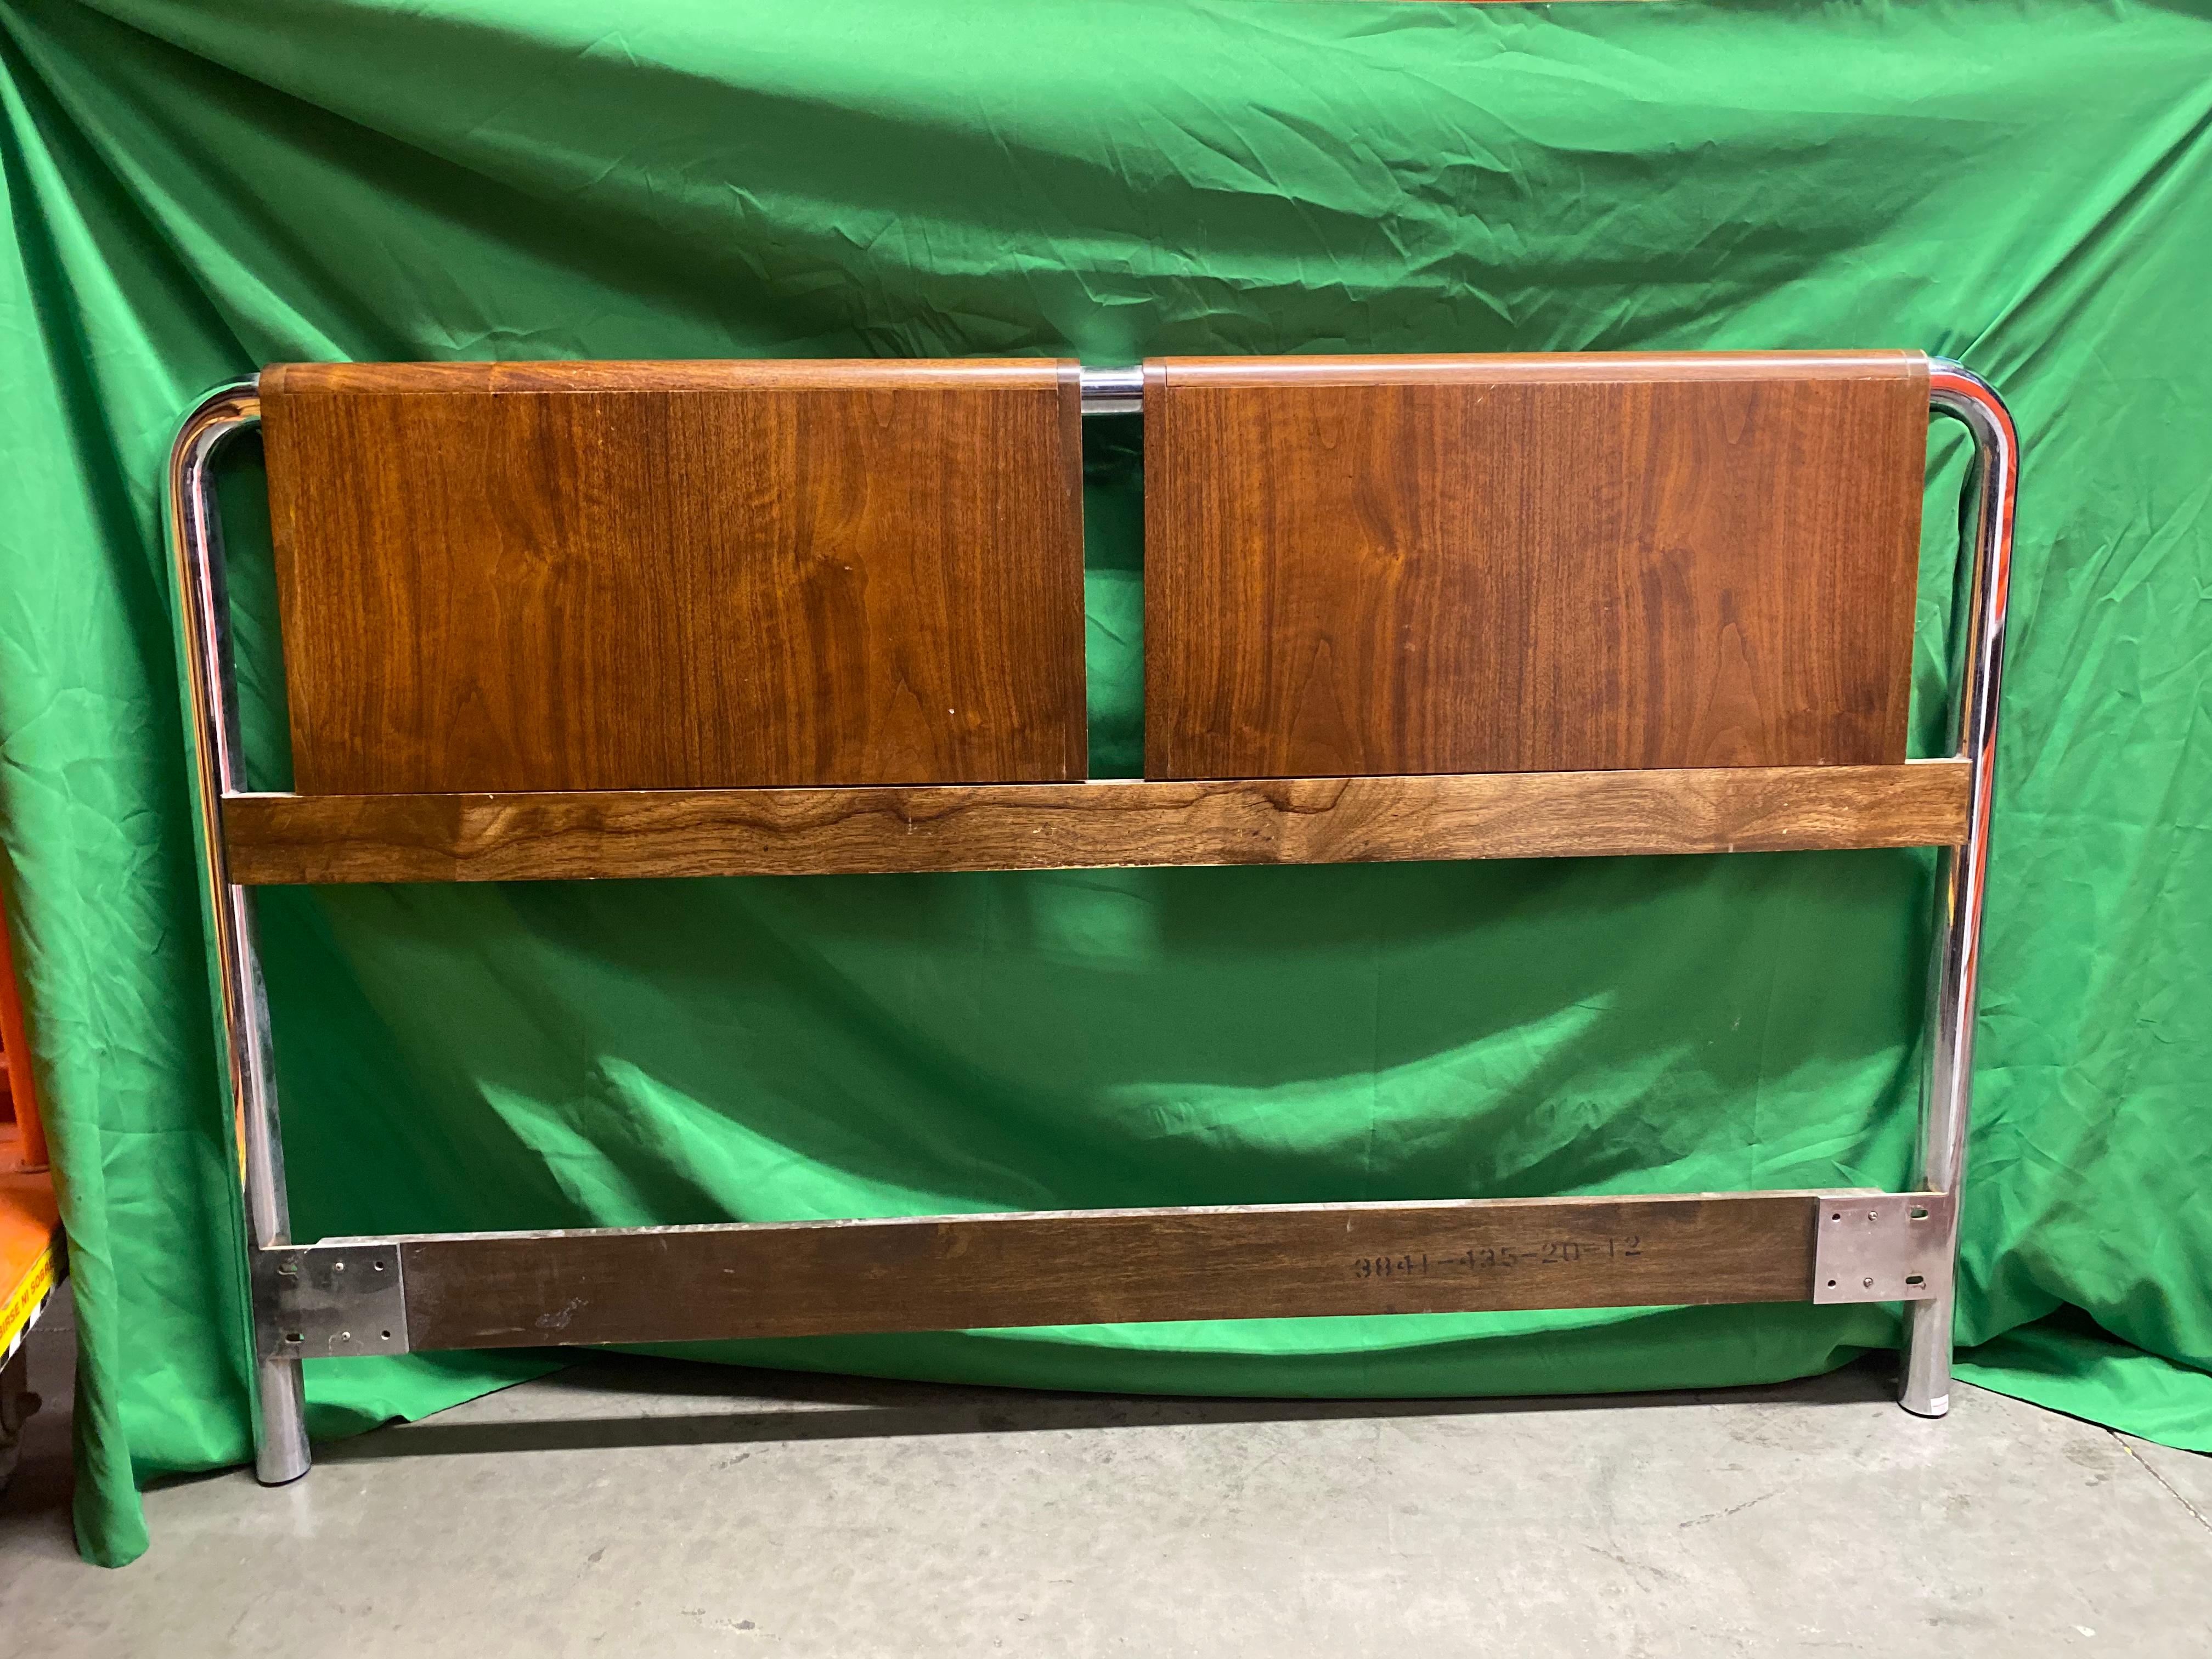 Mid-Century Modern wood and chrome bed headboard by Thomasville Furniture, Founders Collection. Rounded corners on the chrome rail with two beautiful wood panels.

Matching nightstands and high boy wardrobe available separately.